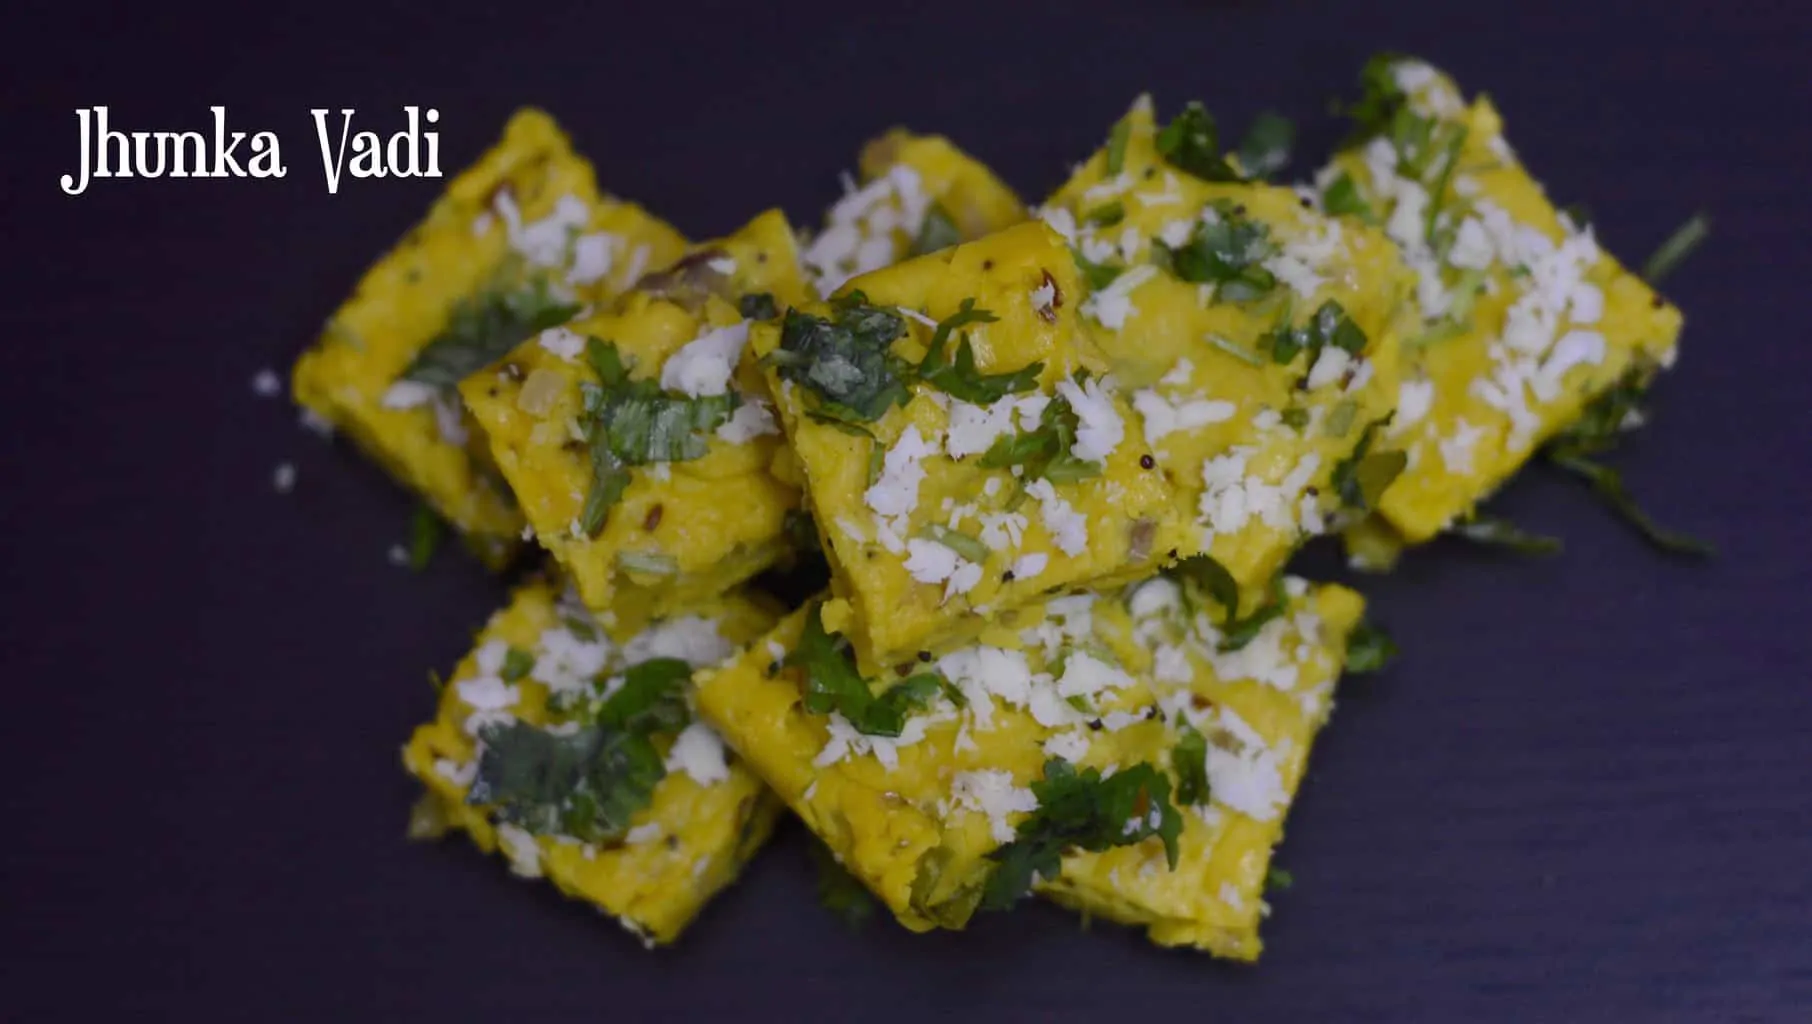 jhunka vadi served on a plate garnished with cilantro and coconut